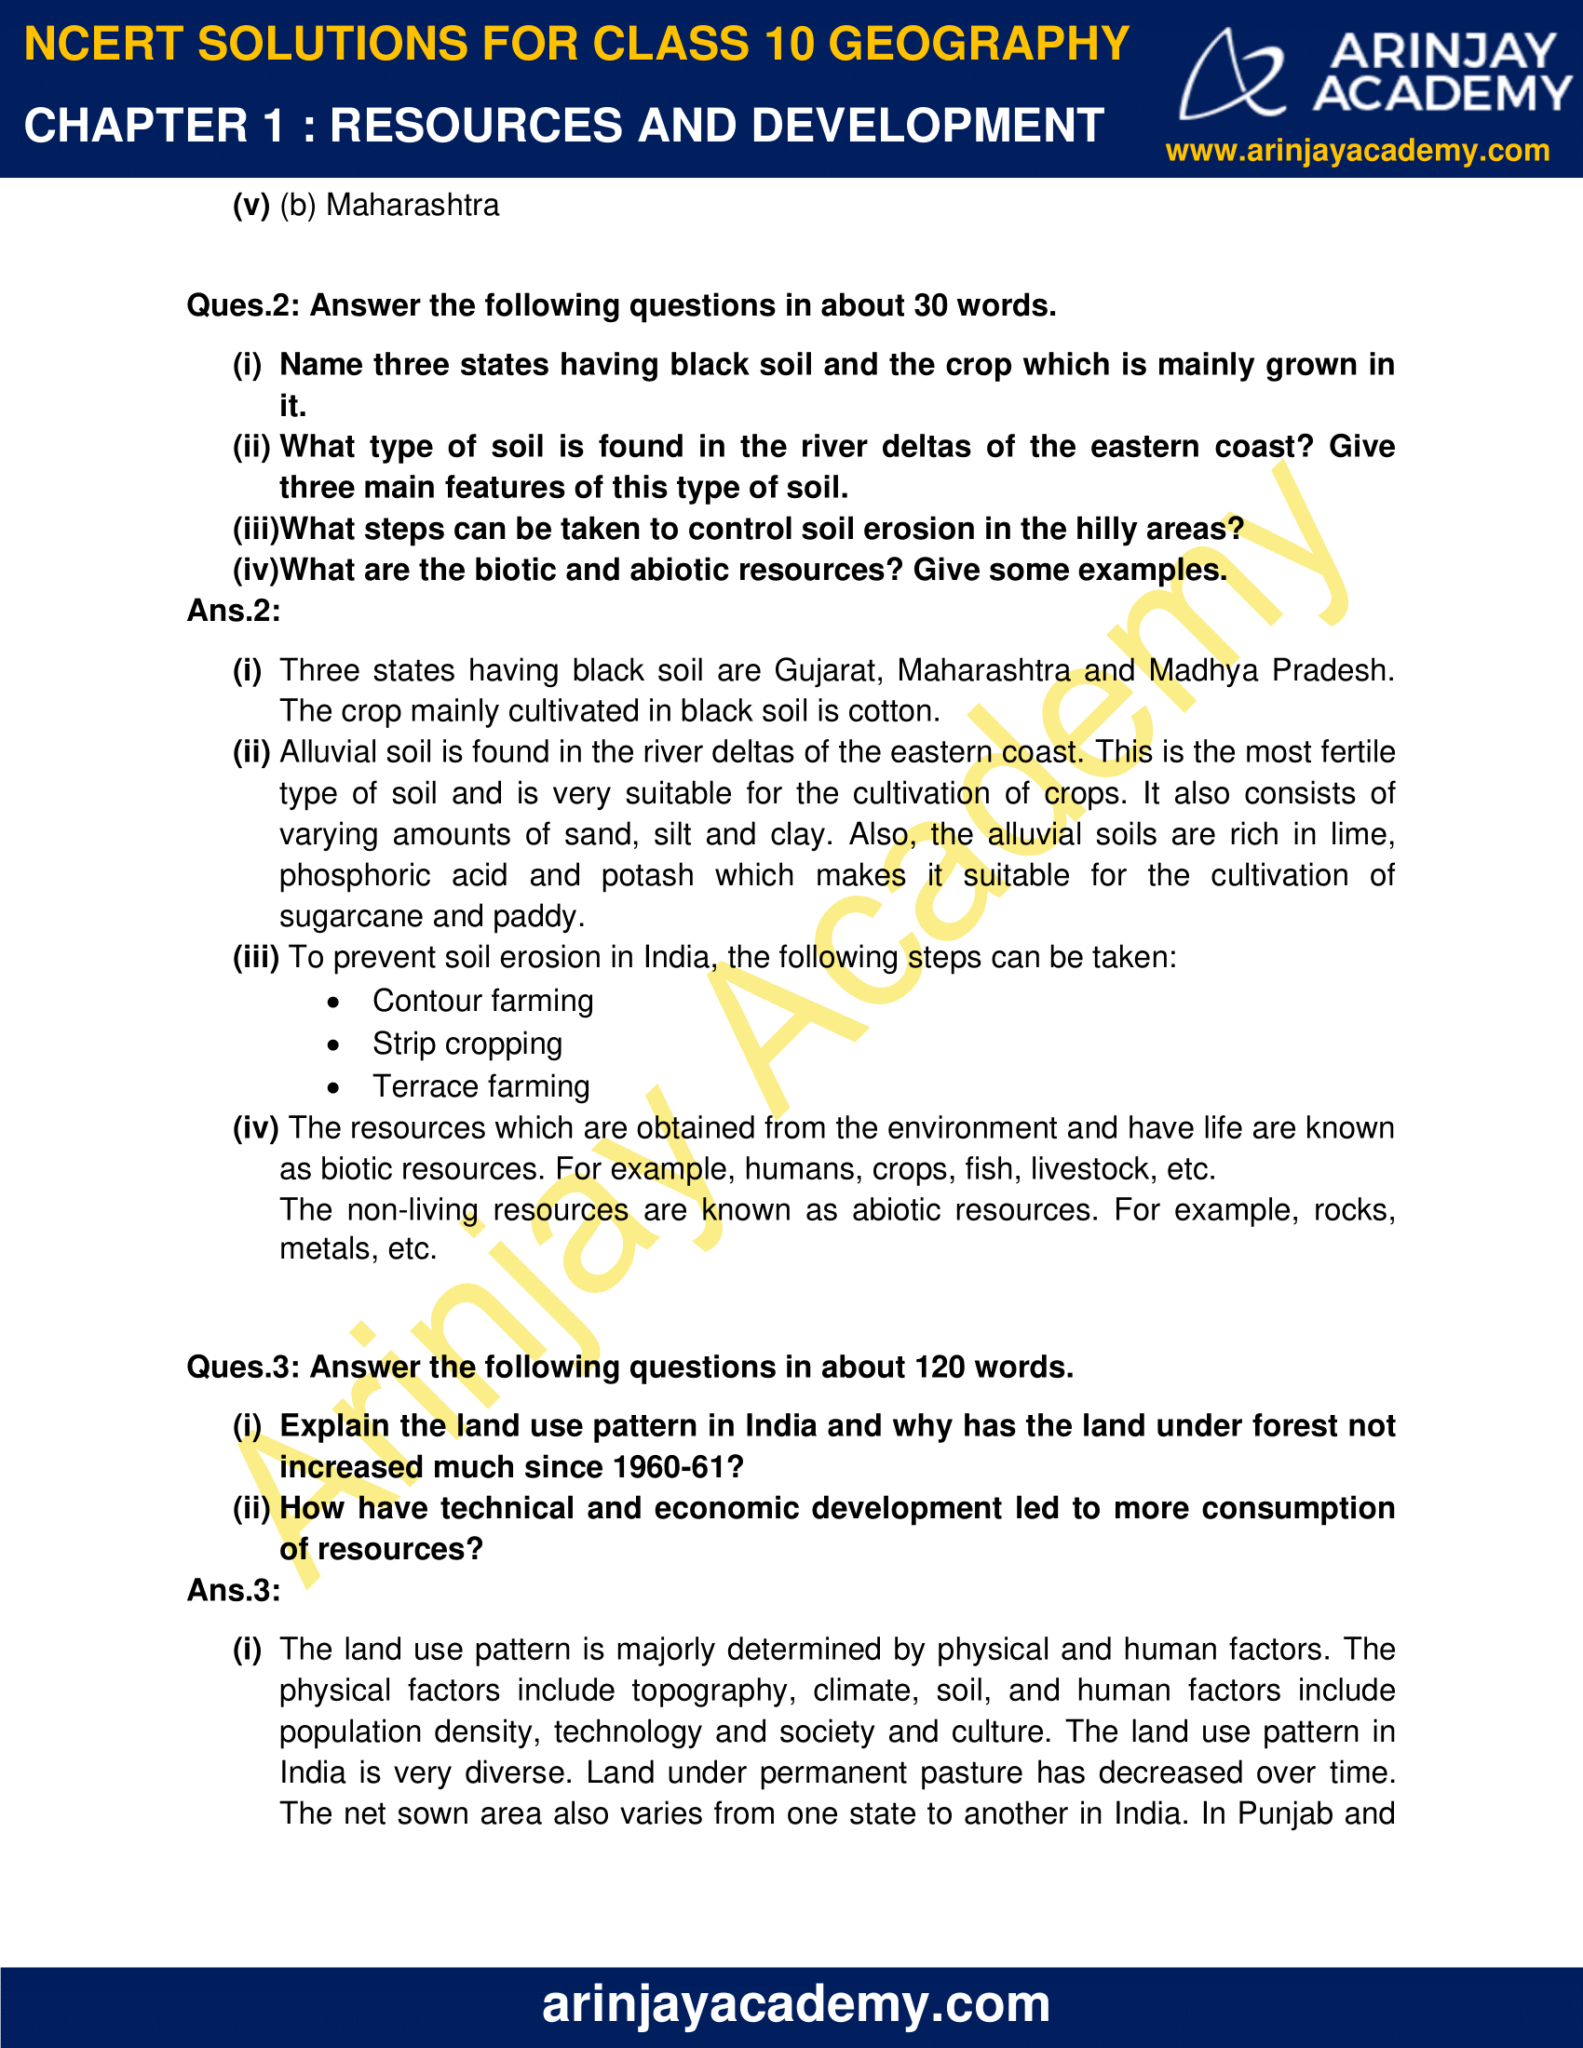 ncert class 10 geography chapter 1 case study questions